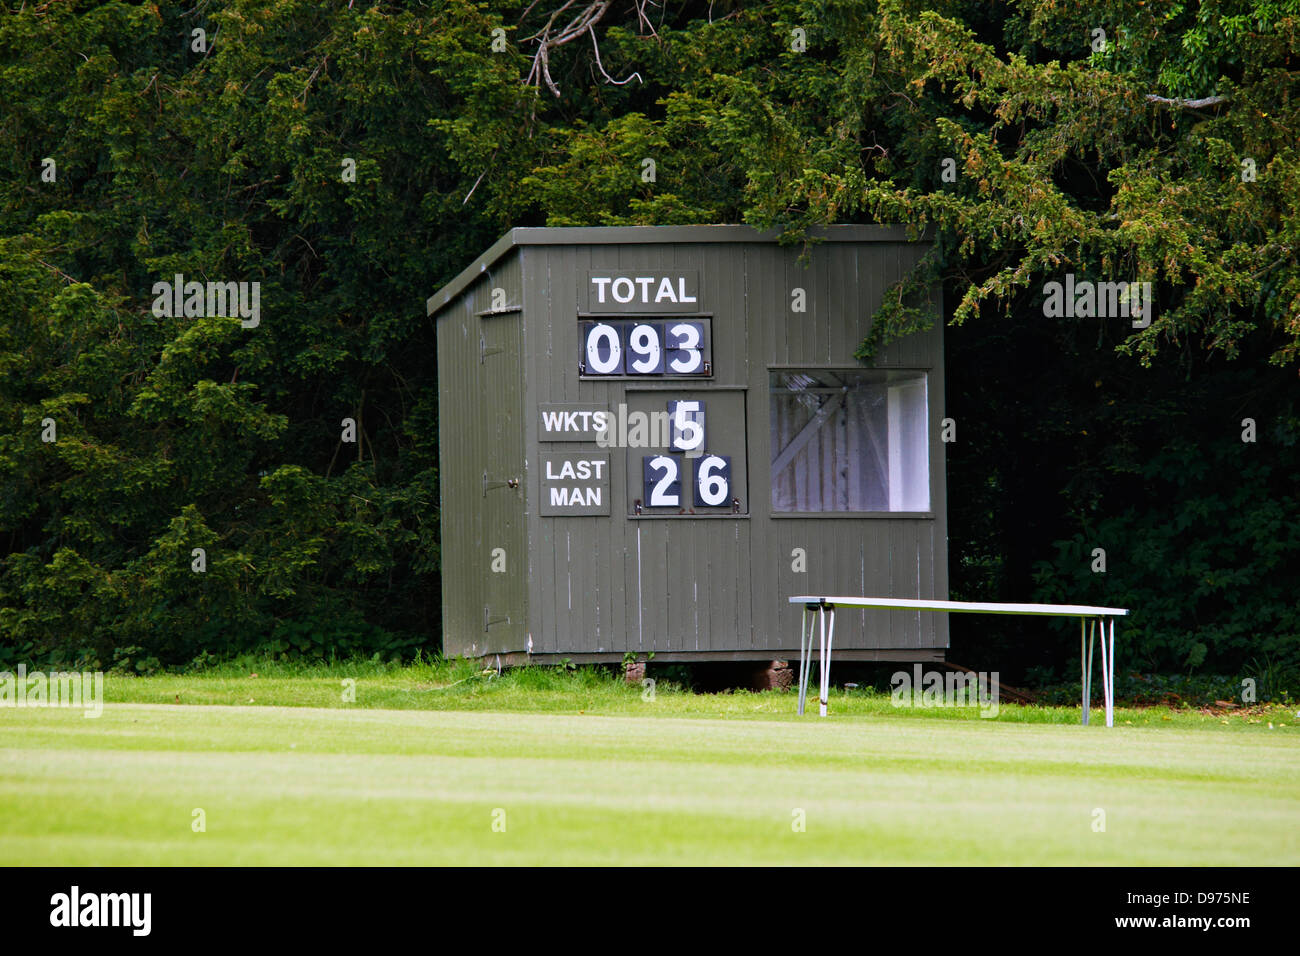 Cricket scoreboard with manual numbers Stock Photo